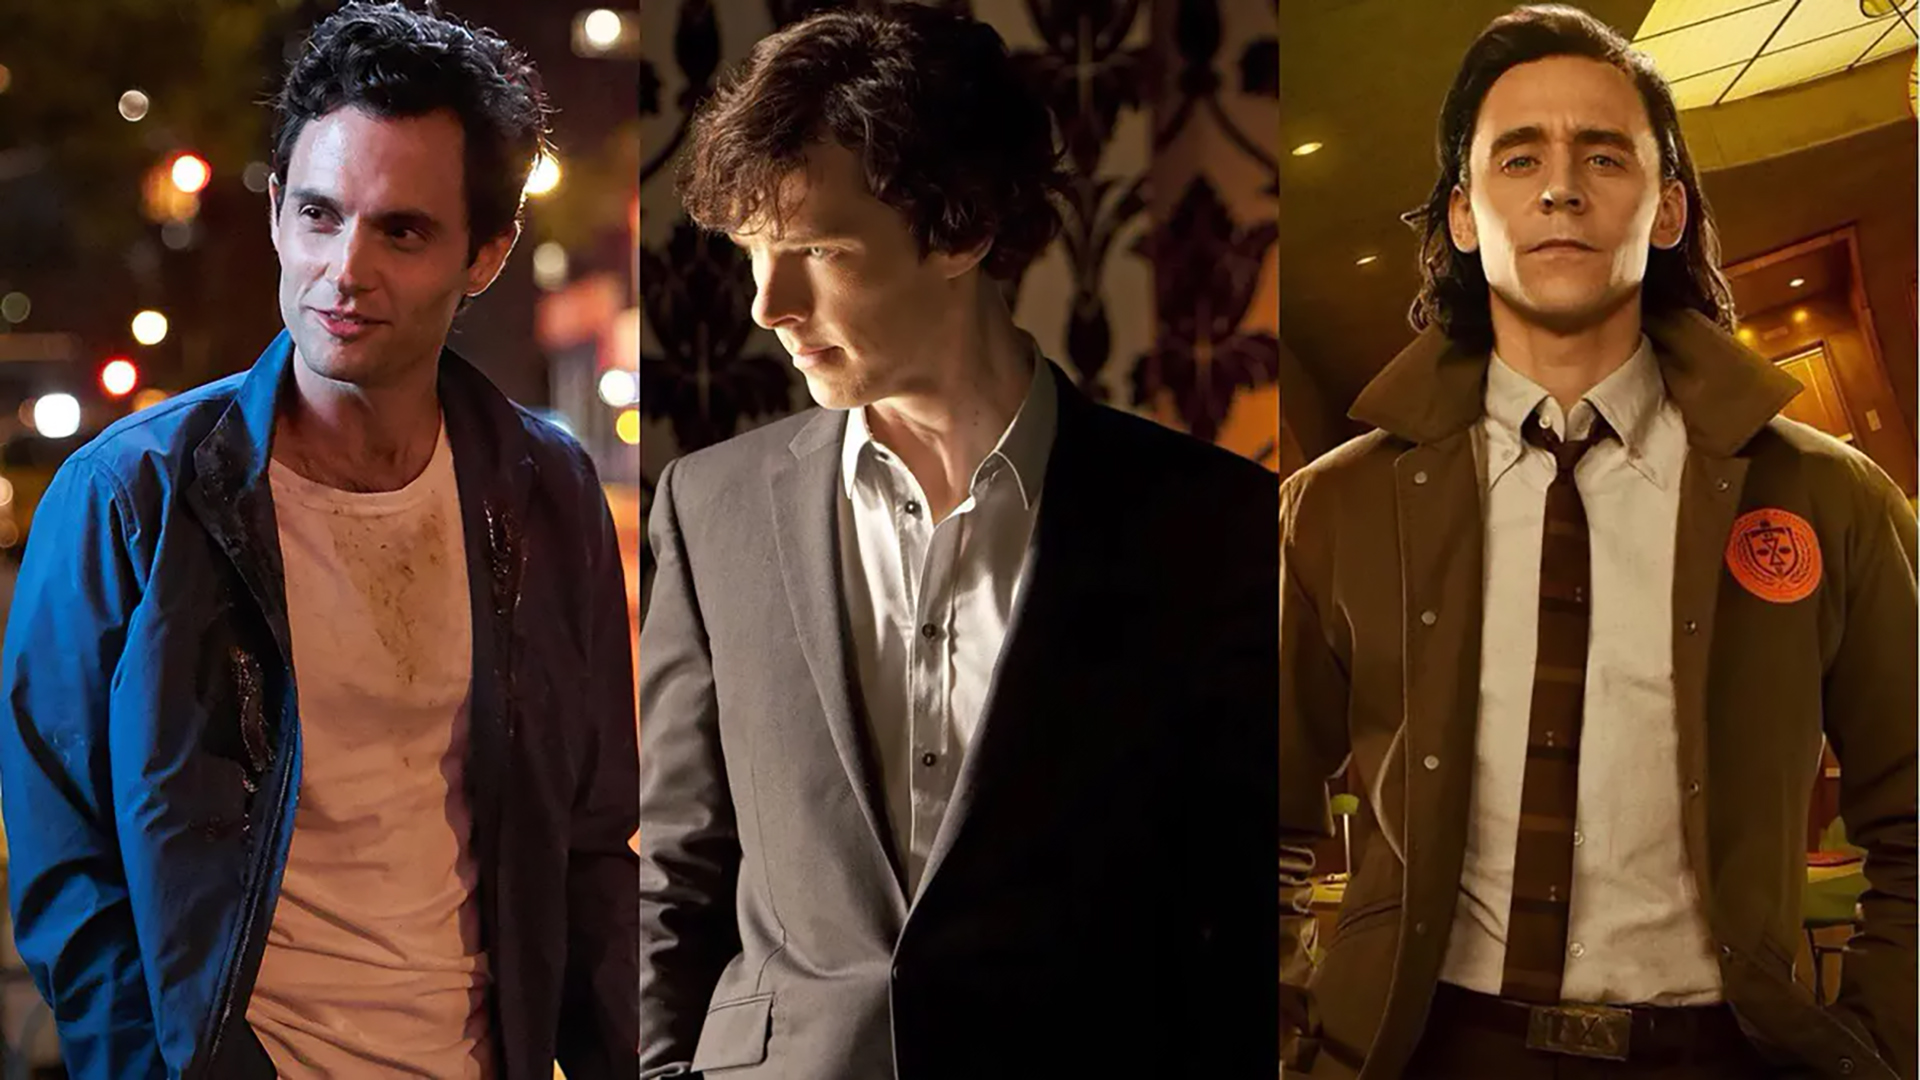 5 Toxic Characters on TV We Can't Help But Love Anyway